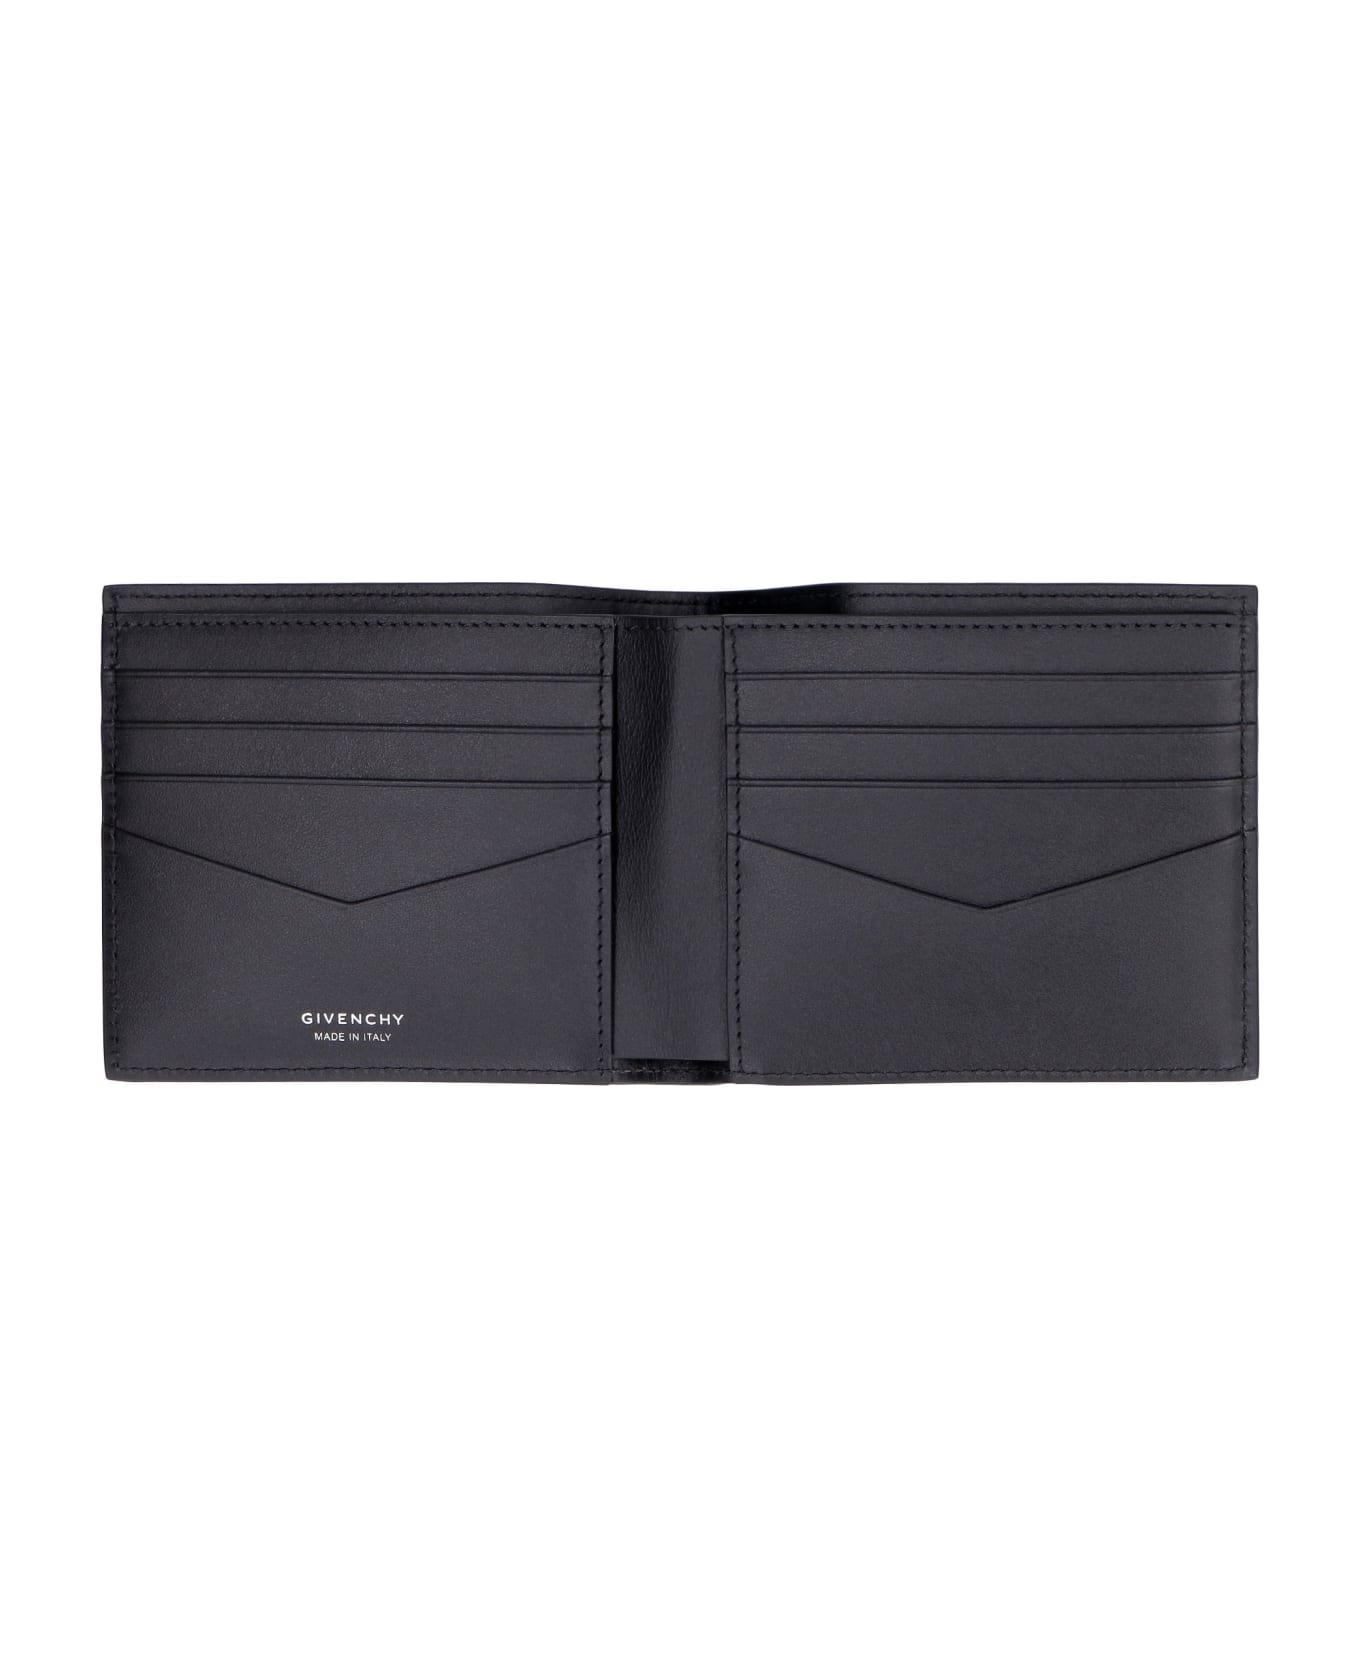 Givenchy Logo Leather Wallet - BLACK